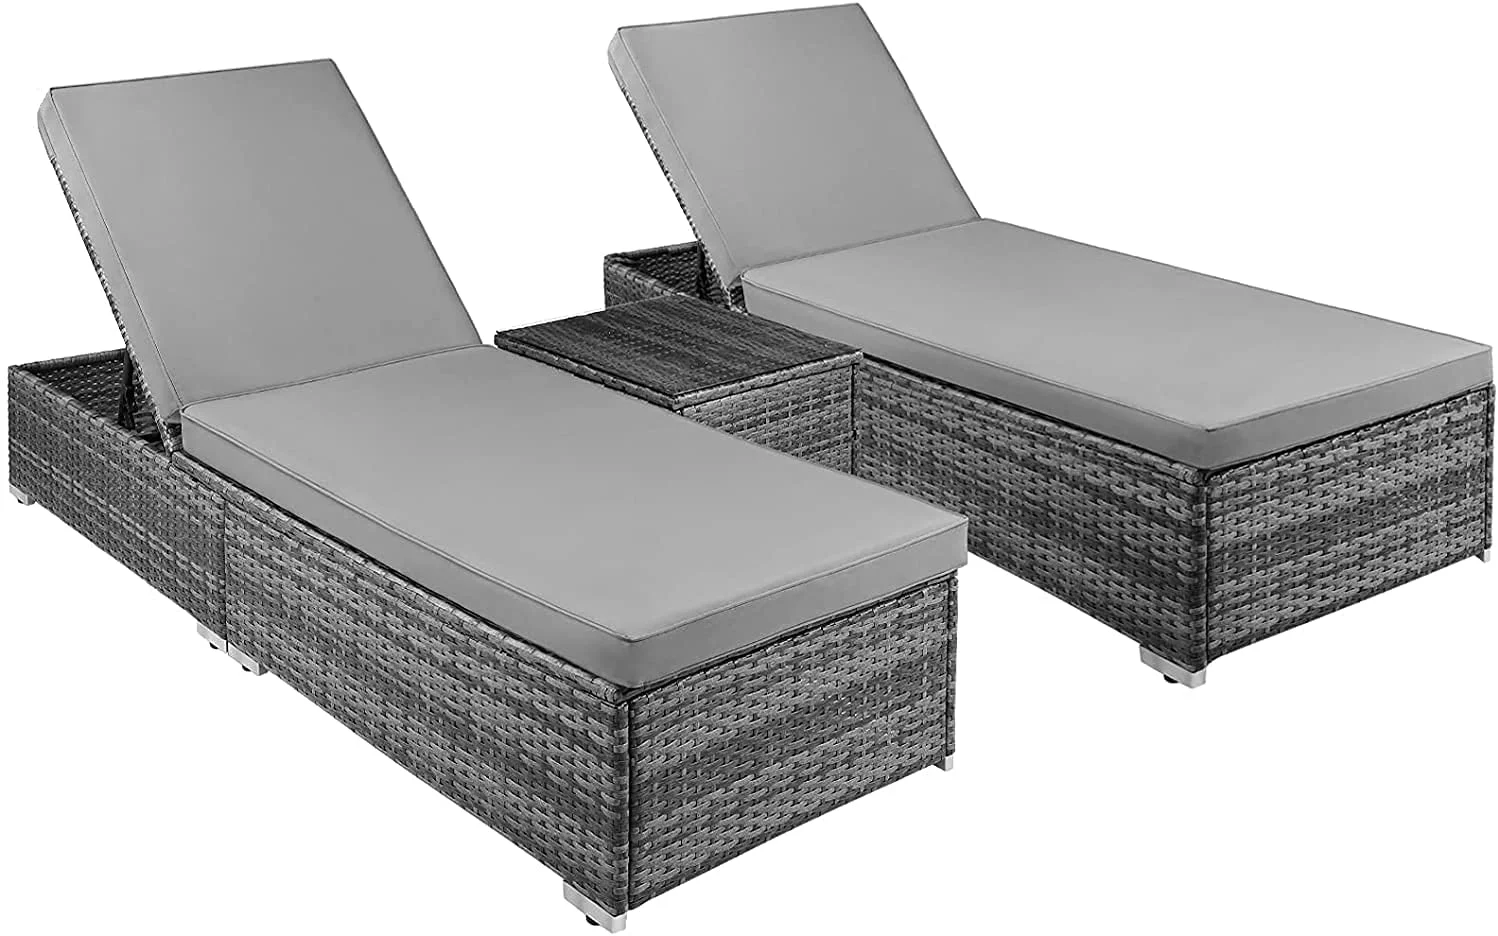 

Rattan sun loungers, 3 piece rattan recliner chaise lounge set, 5 adjustable backrest, 8cm cushions, coffee table, sun bed